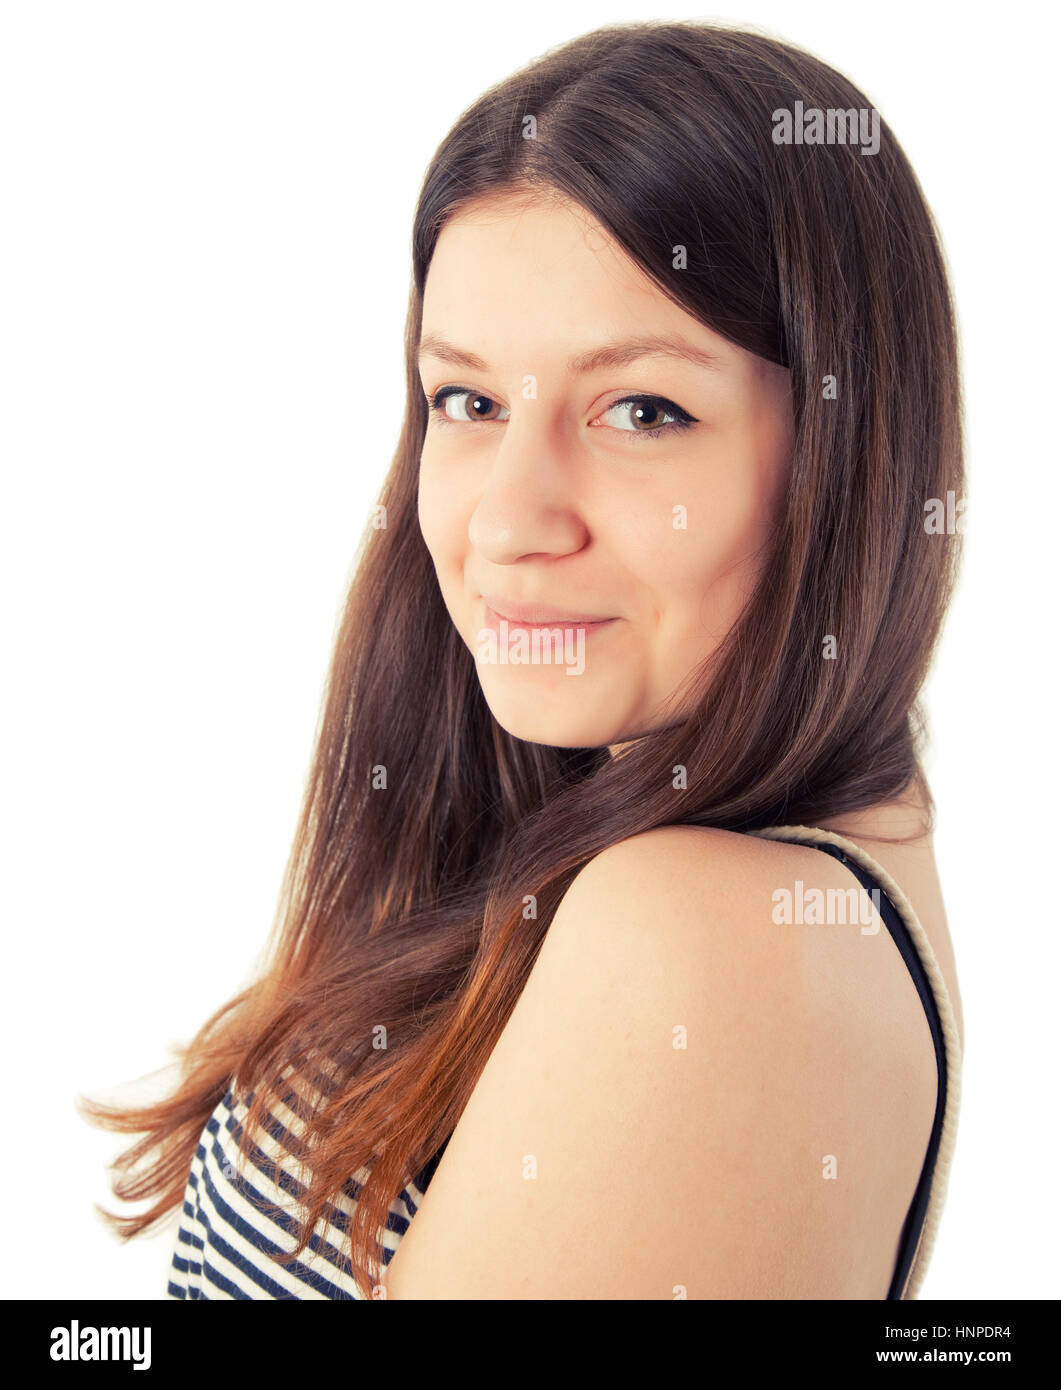 portrait of a beautiful young woman Stock Photo